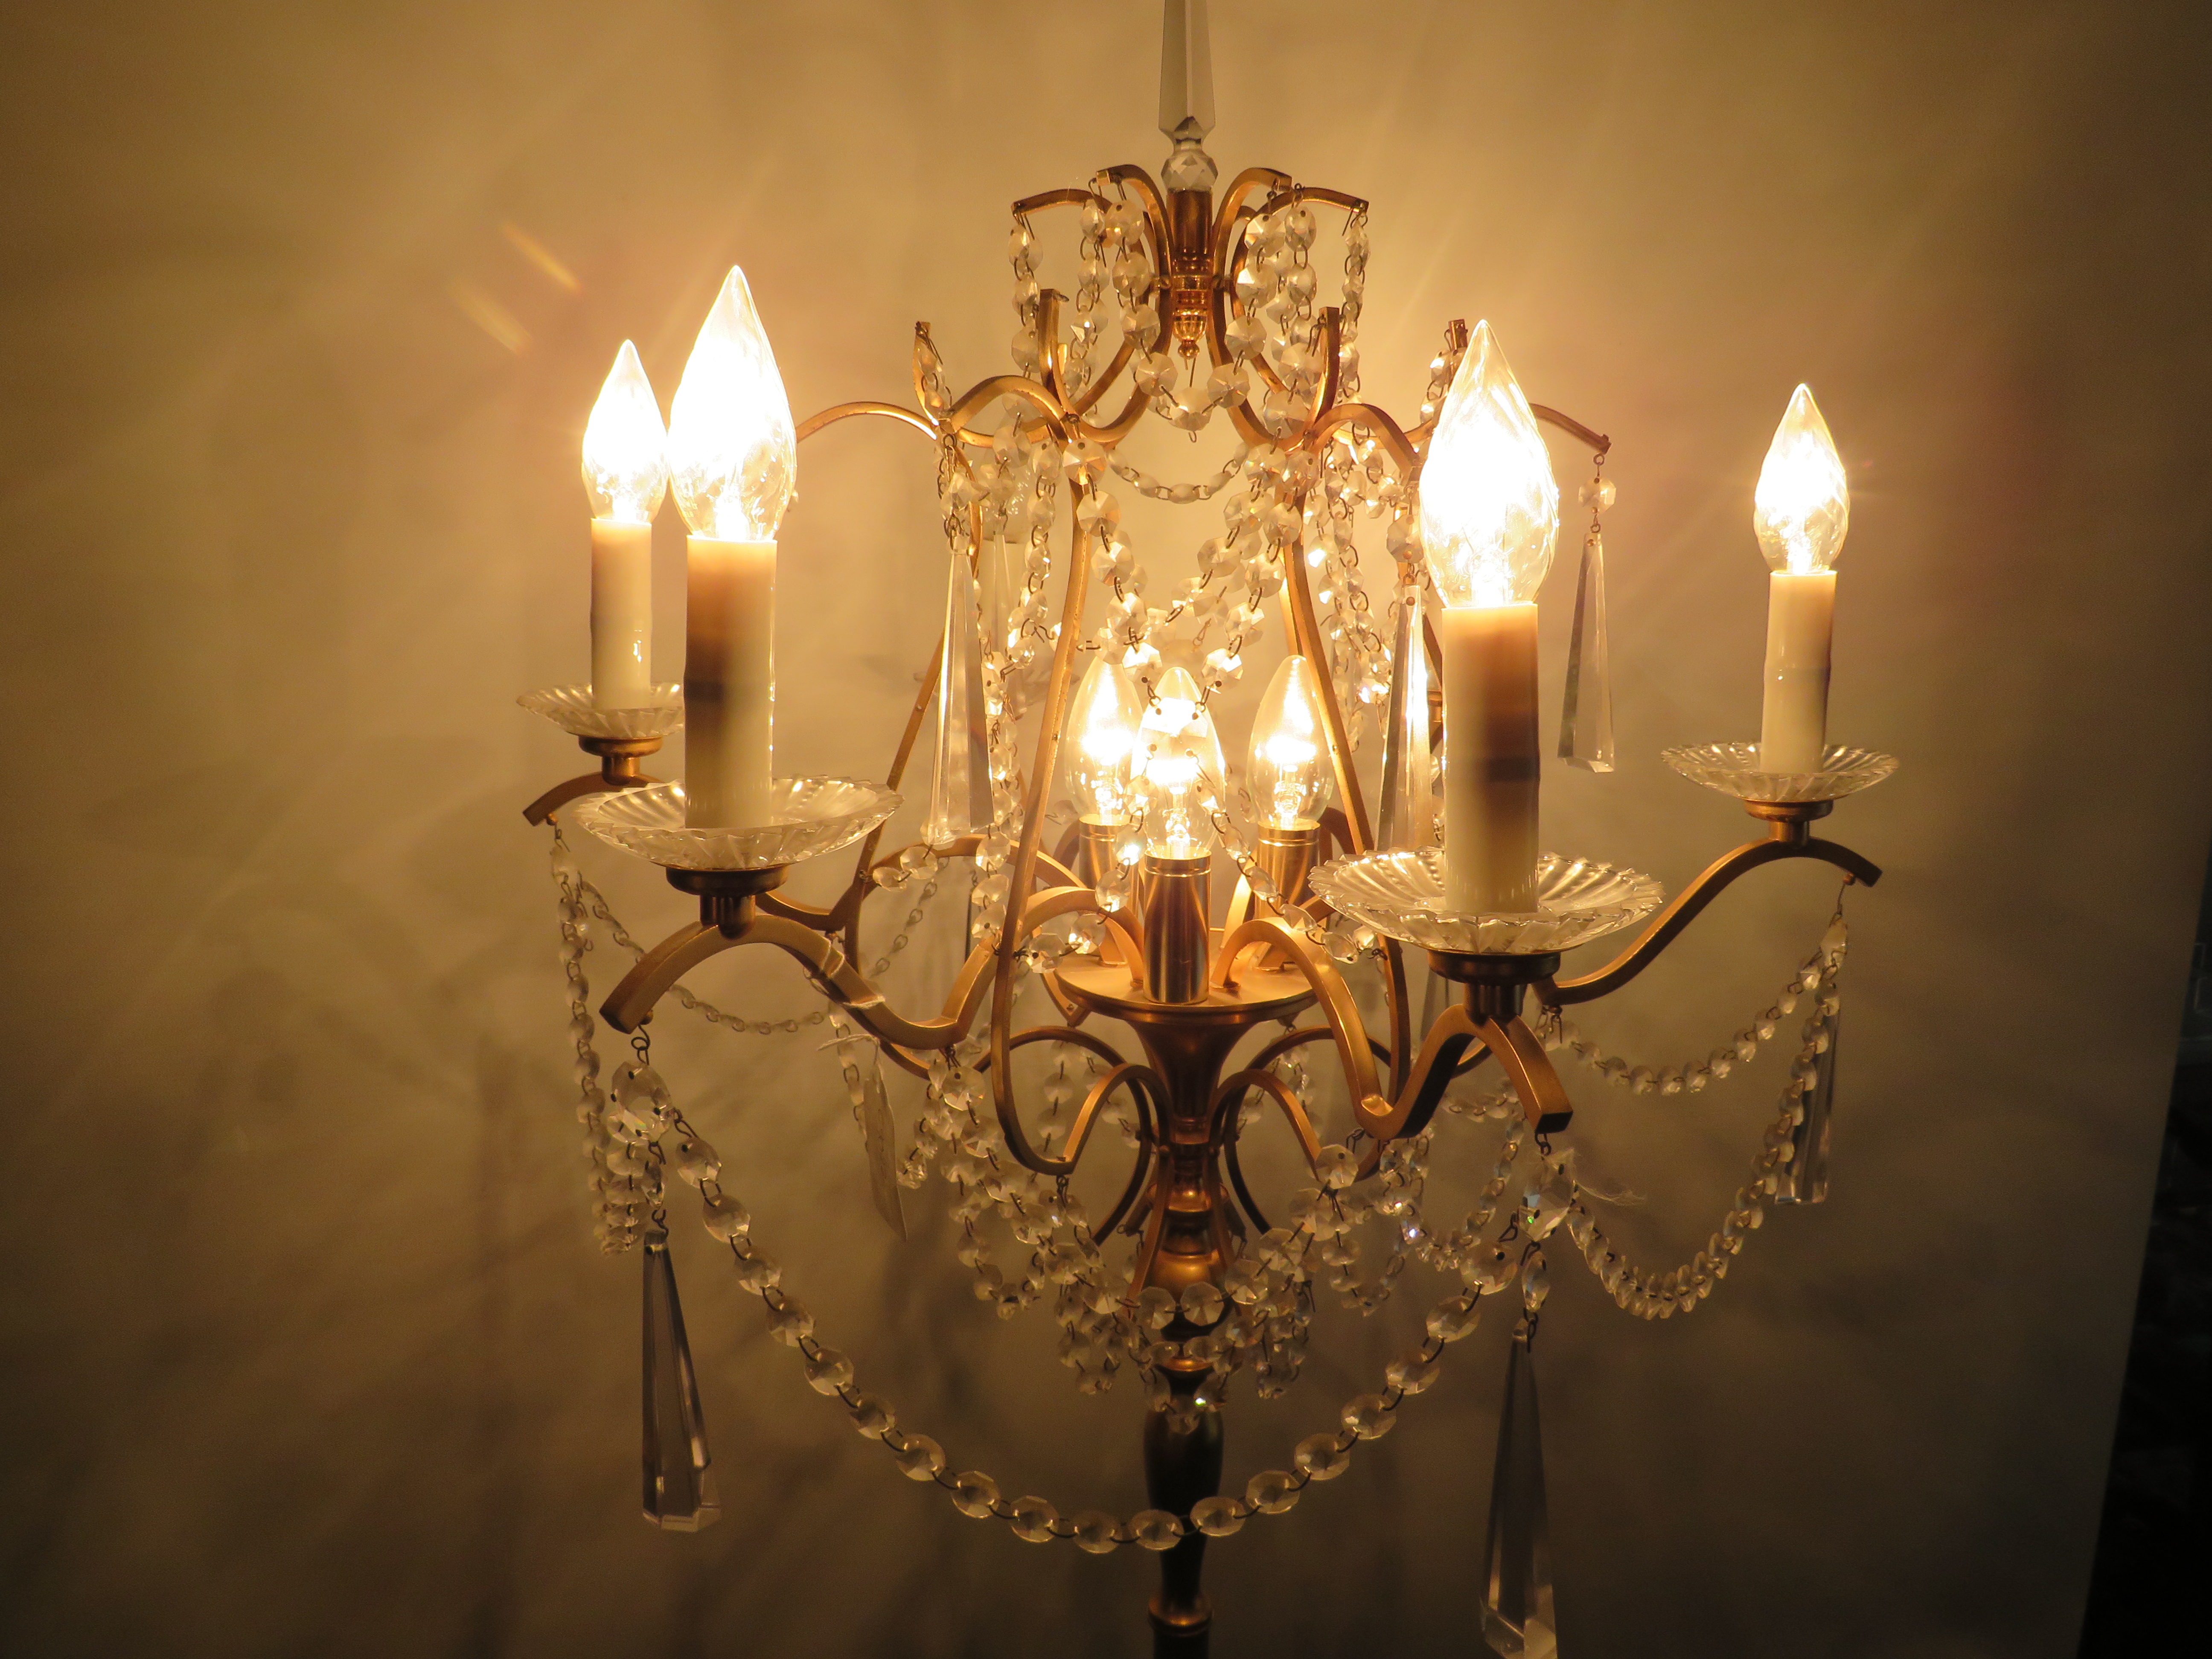 Brushed metal brass effect Standard lamp with 9 Candle bulbs and hanging glass lustres. Approx 67 in - Image 2 of 7